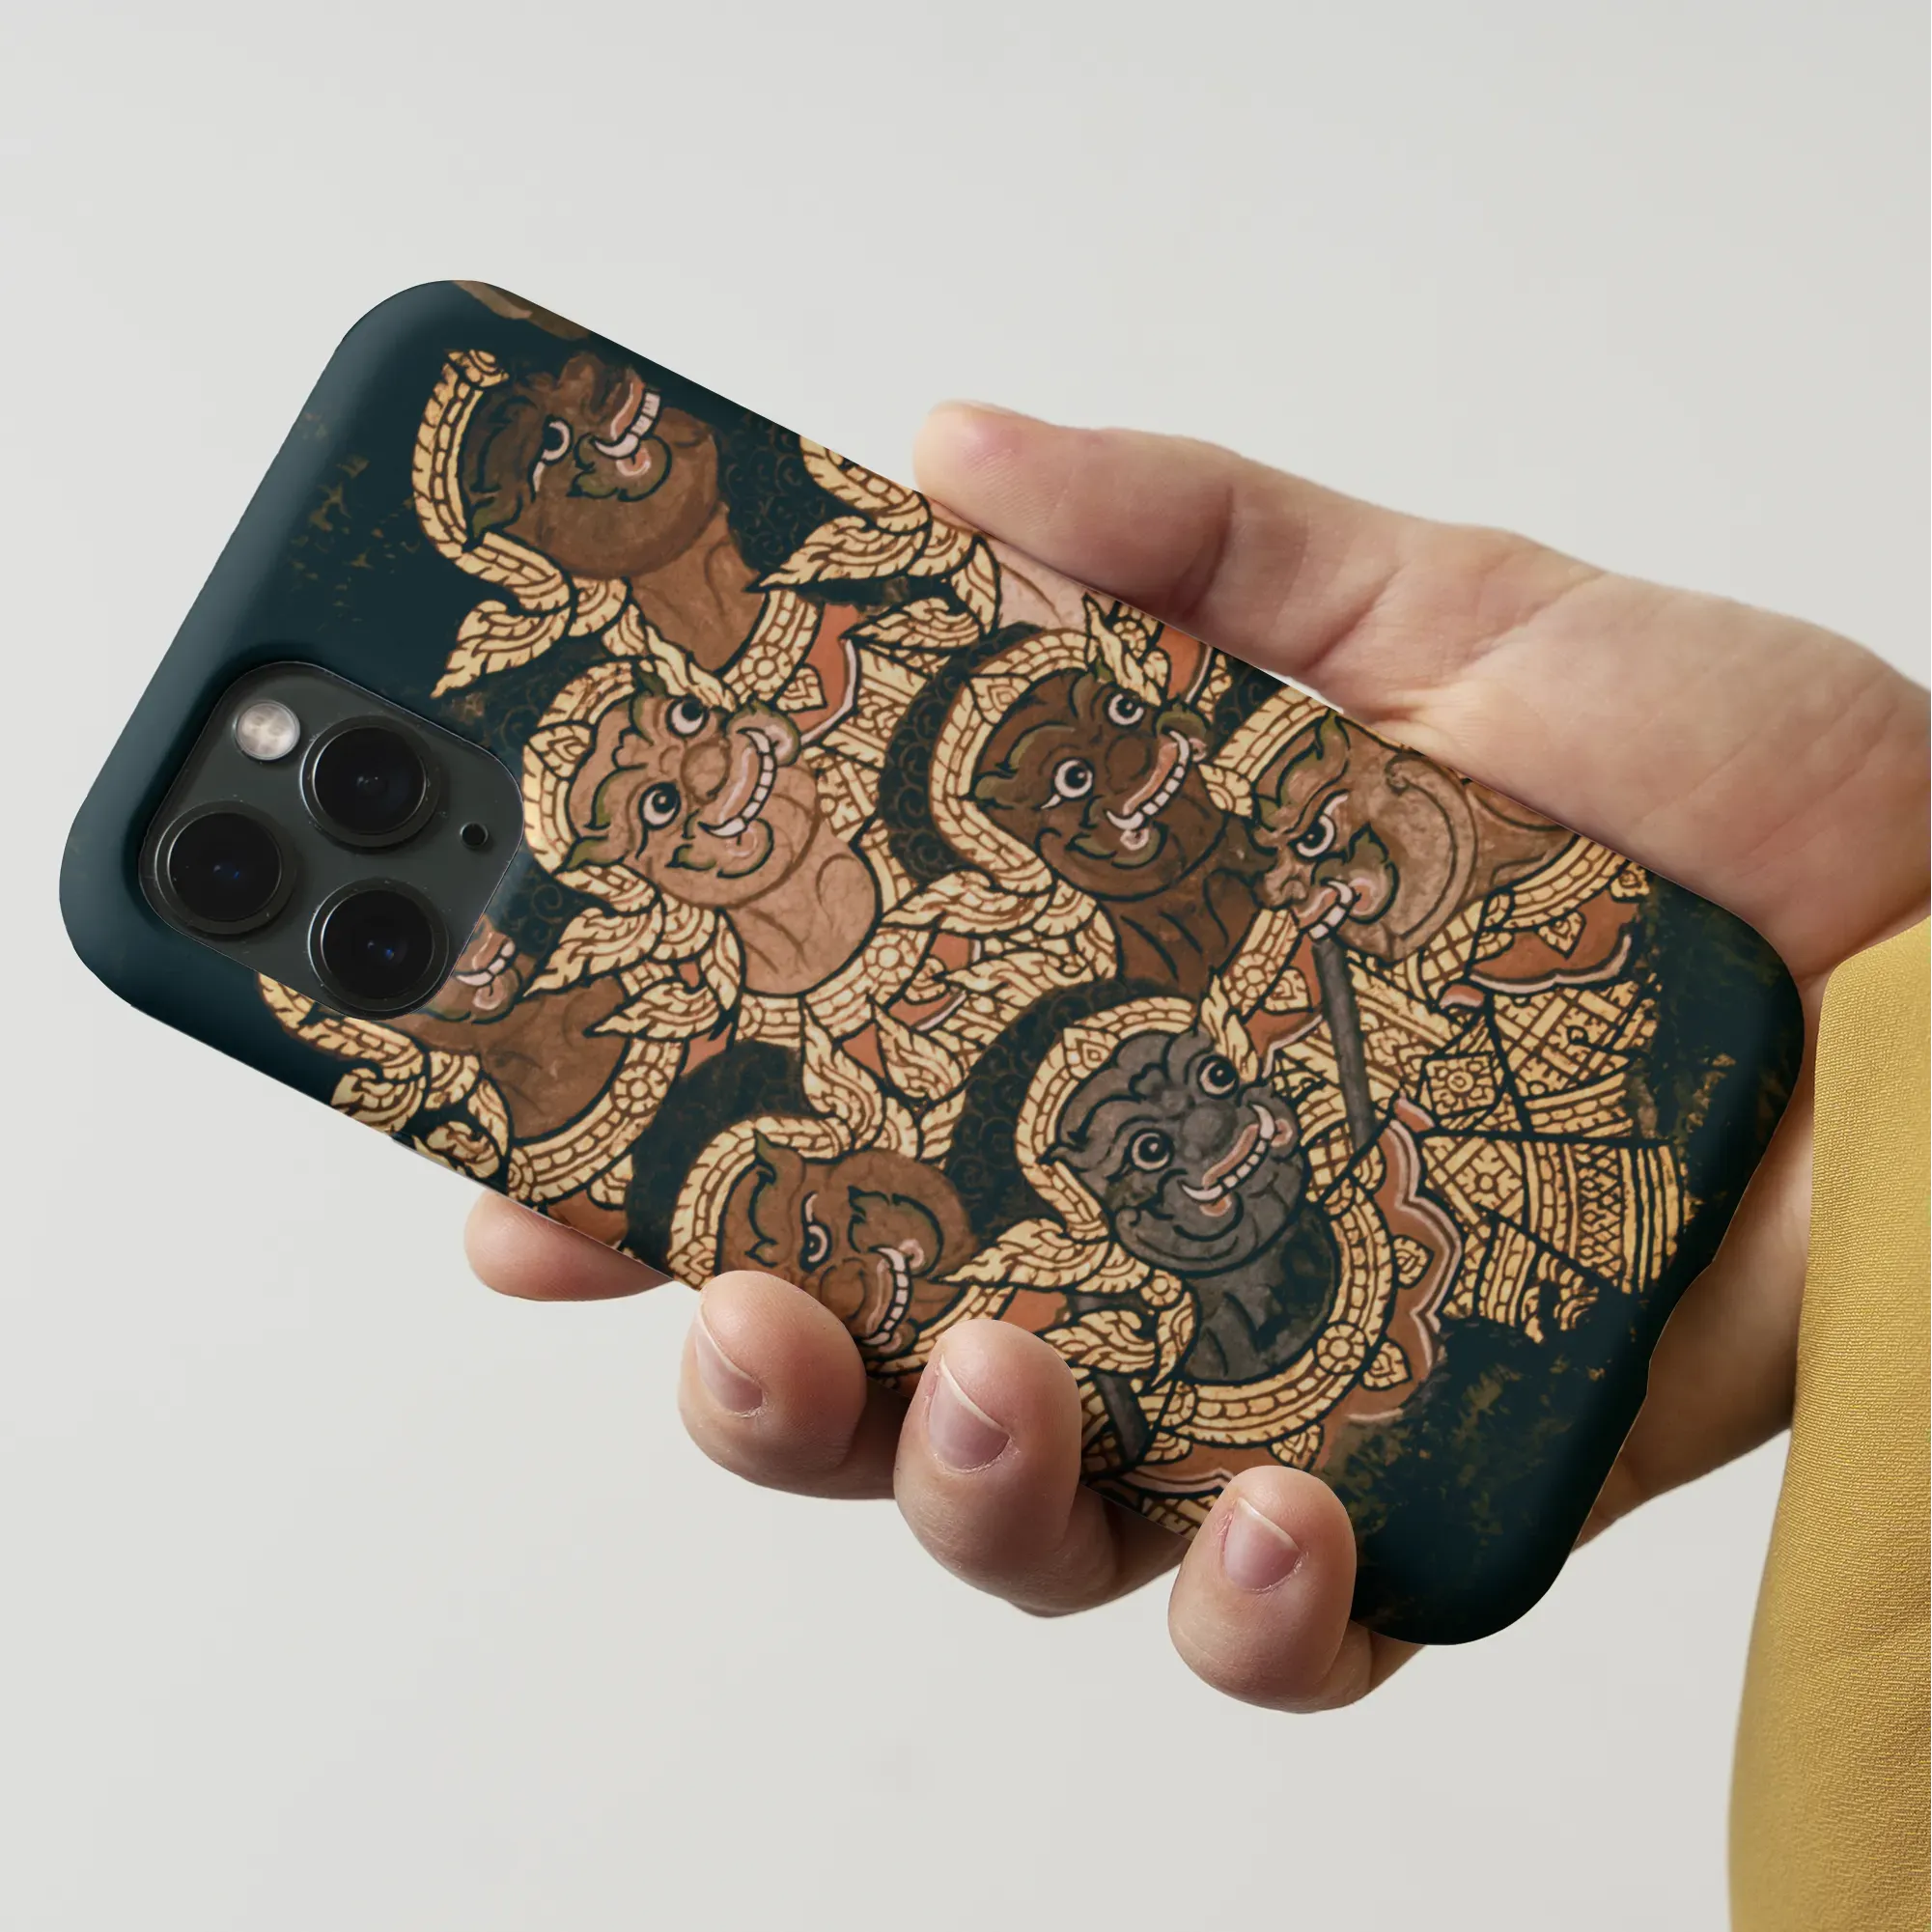 Babes In The Woods - Thailand Aesthetic Art Phone Case - Mobile Phone Cases - Aesthetic Art